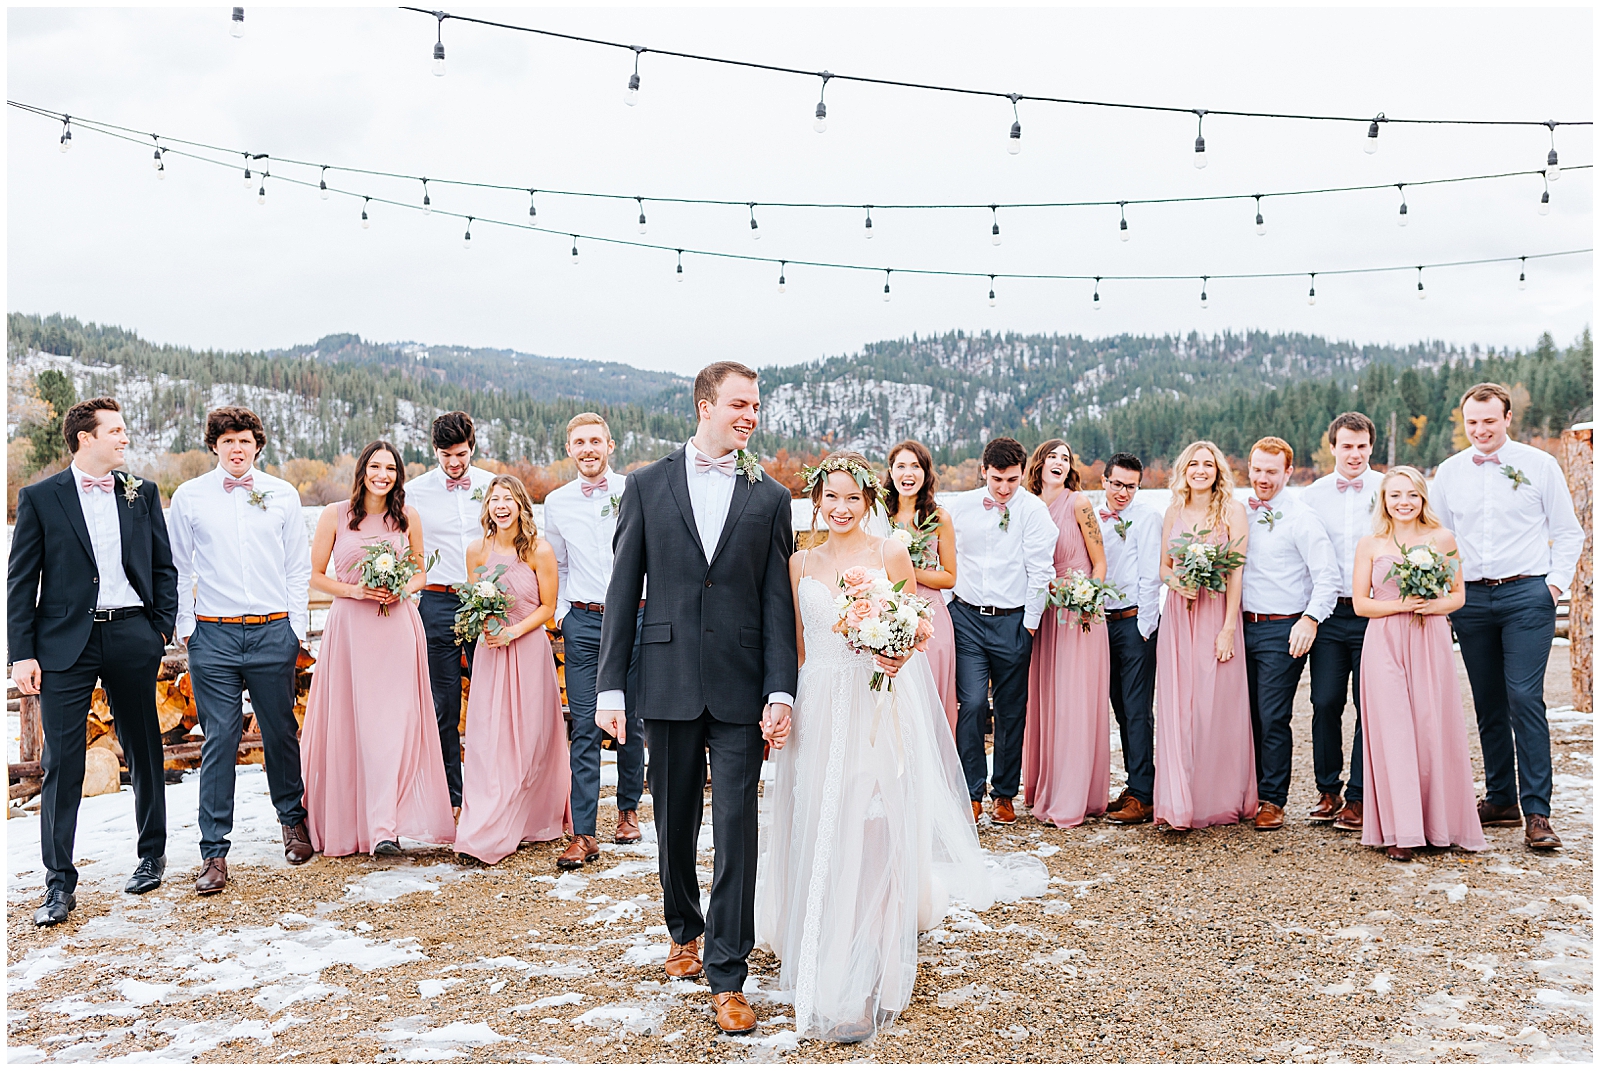 Dusty Rose and Navy Bridal Party at Sixty Chapel Wedding